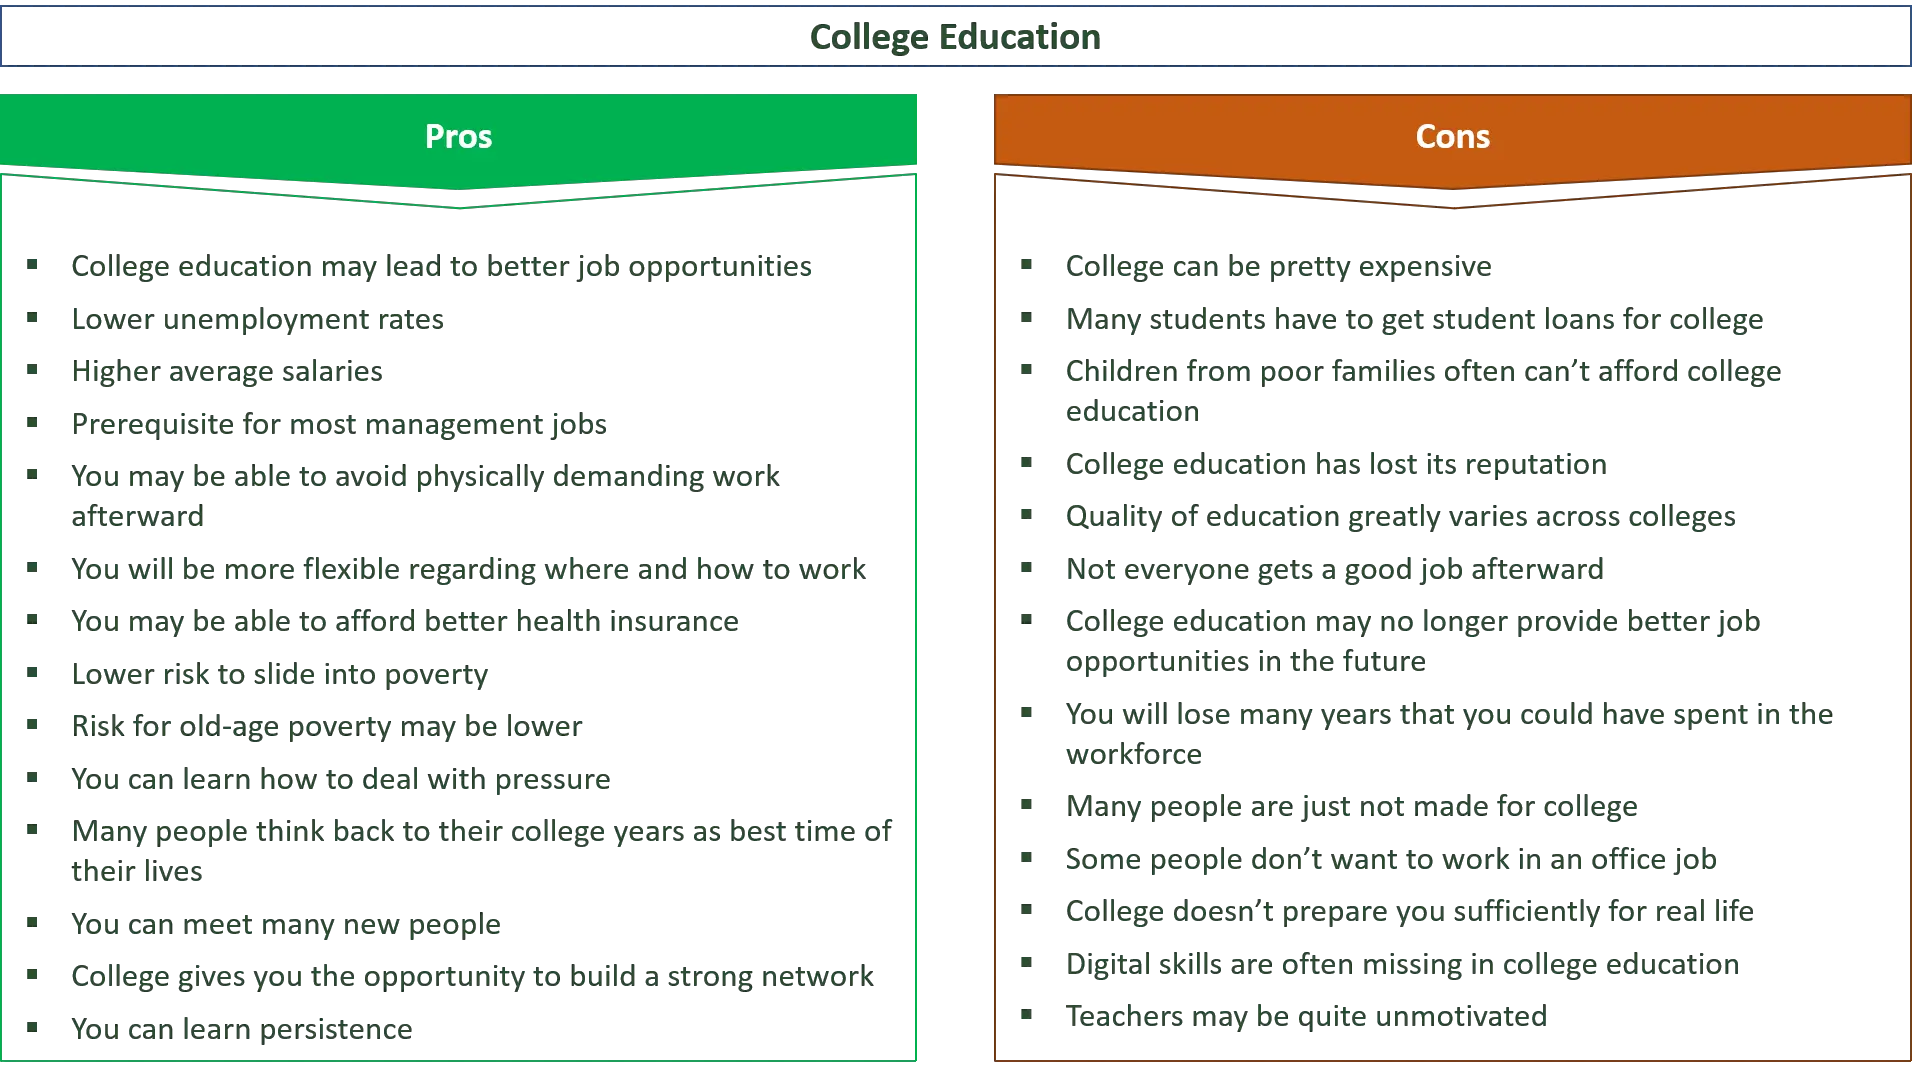 higher education pros and cons